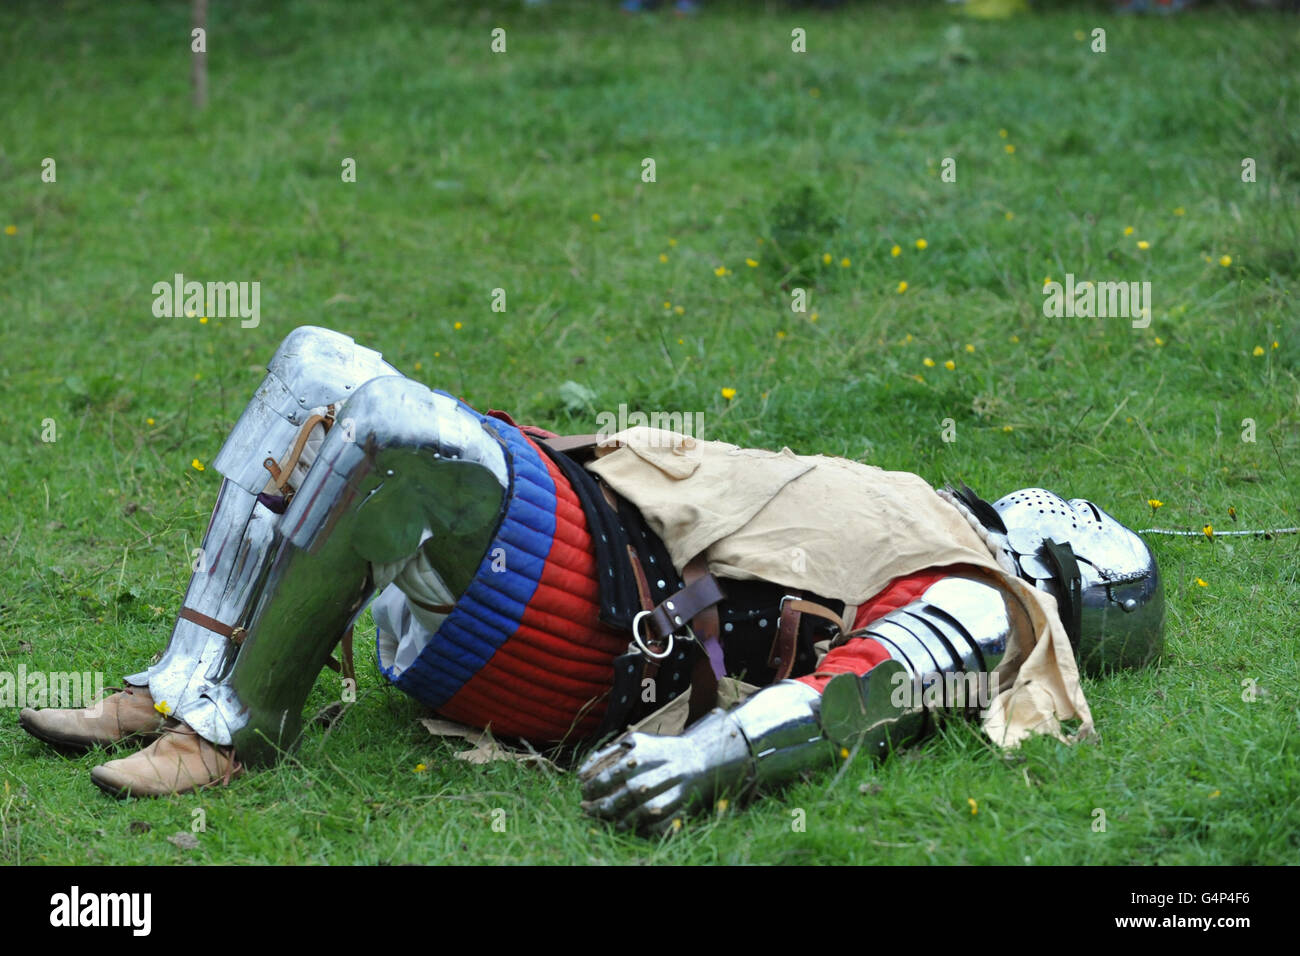 Greenwich, London, UK. 18th June, 2016. A re-enactor dressed as a medieval man at arms lying on the grass during a re-enactment in Greenwich, London, UK. The 'Grand Medieval Joust' was held at Eltham Palace, an English Heritage property which was the home of King Henry VIII as a child. The event aims to give an insight into life at the palace during the medieval period. Credit:  Michael Preston/Alamy Live News Stock Photo